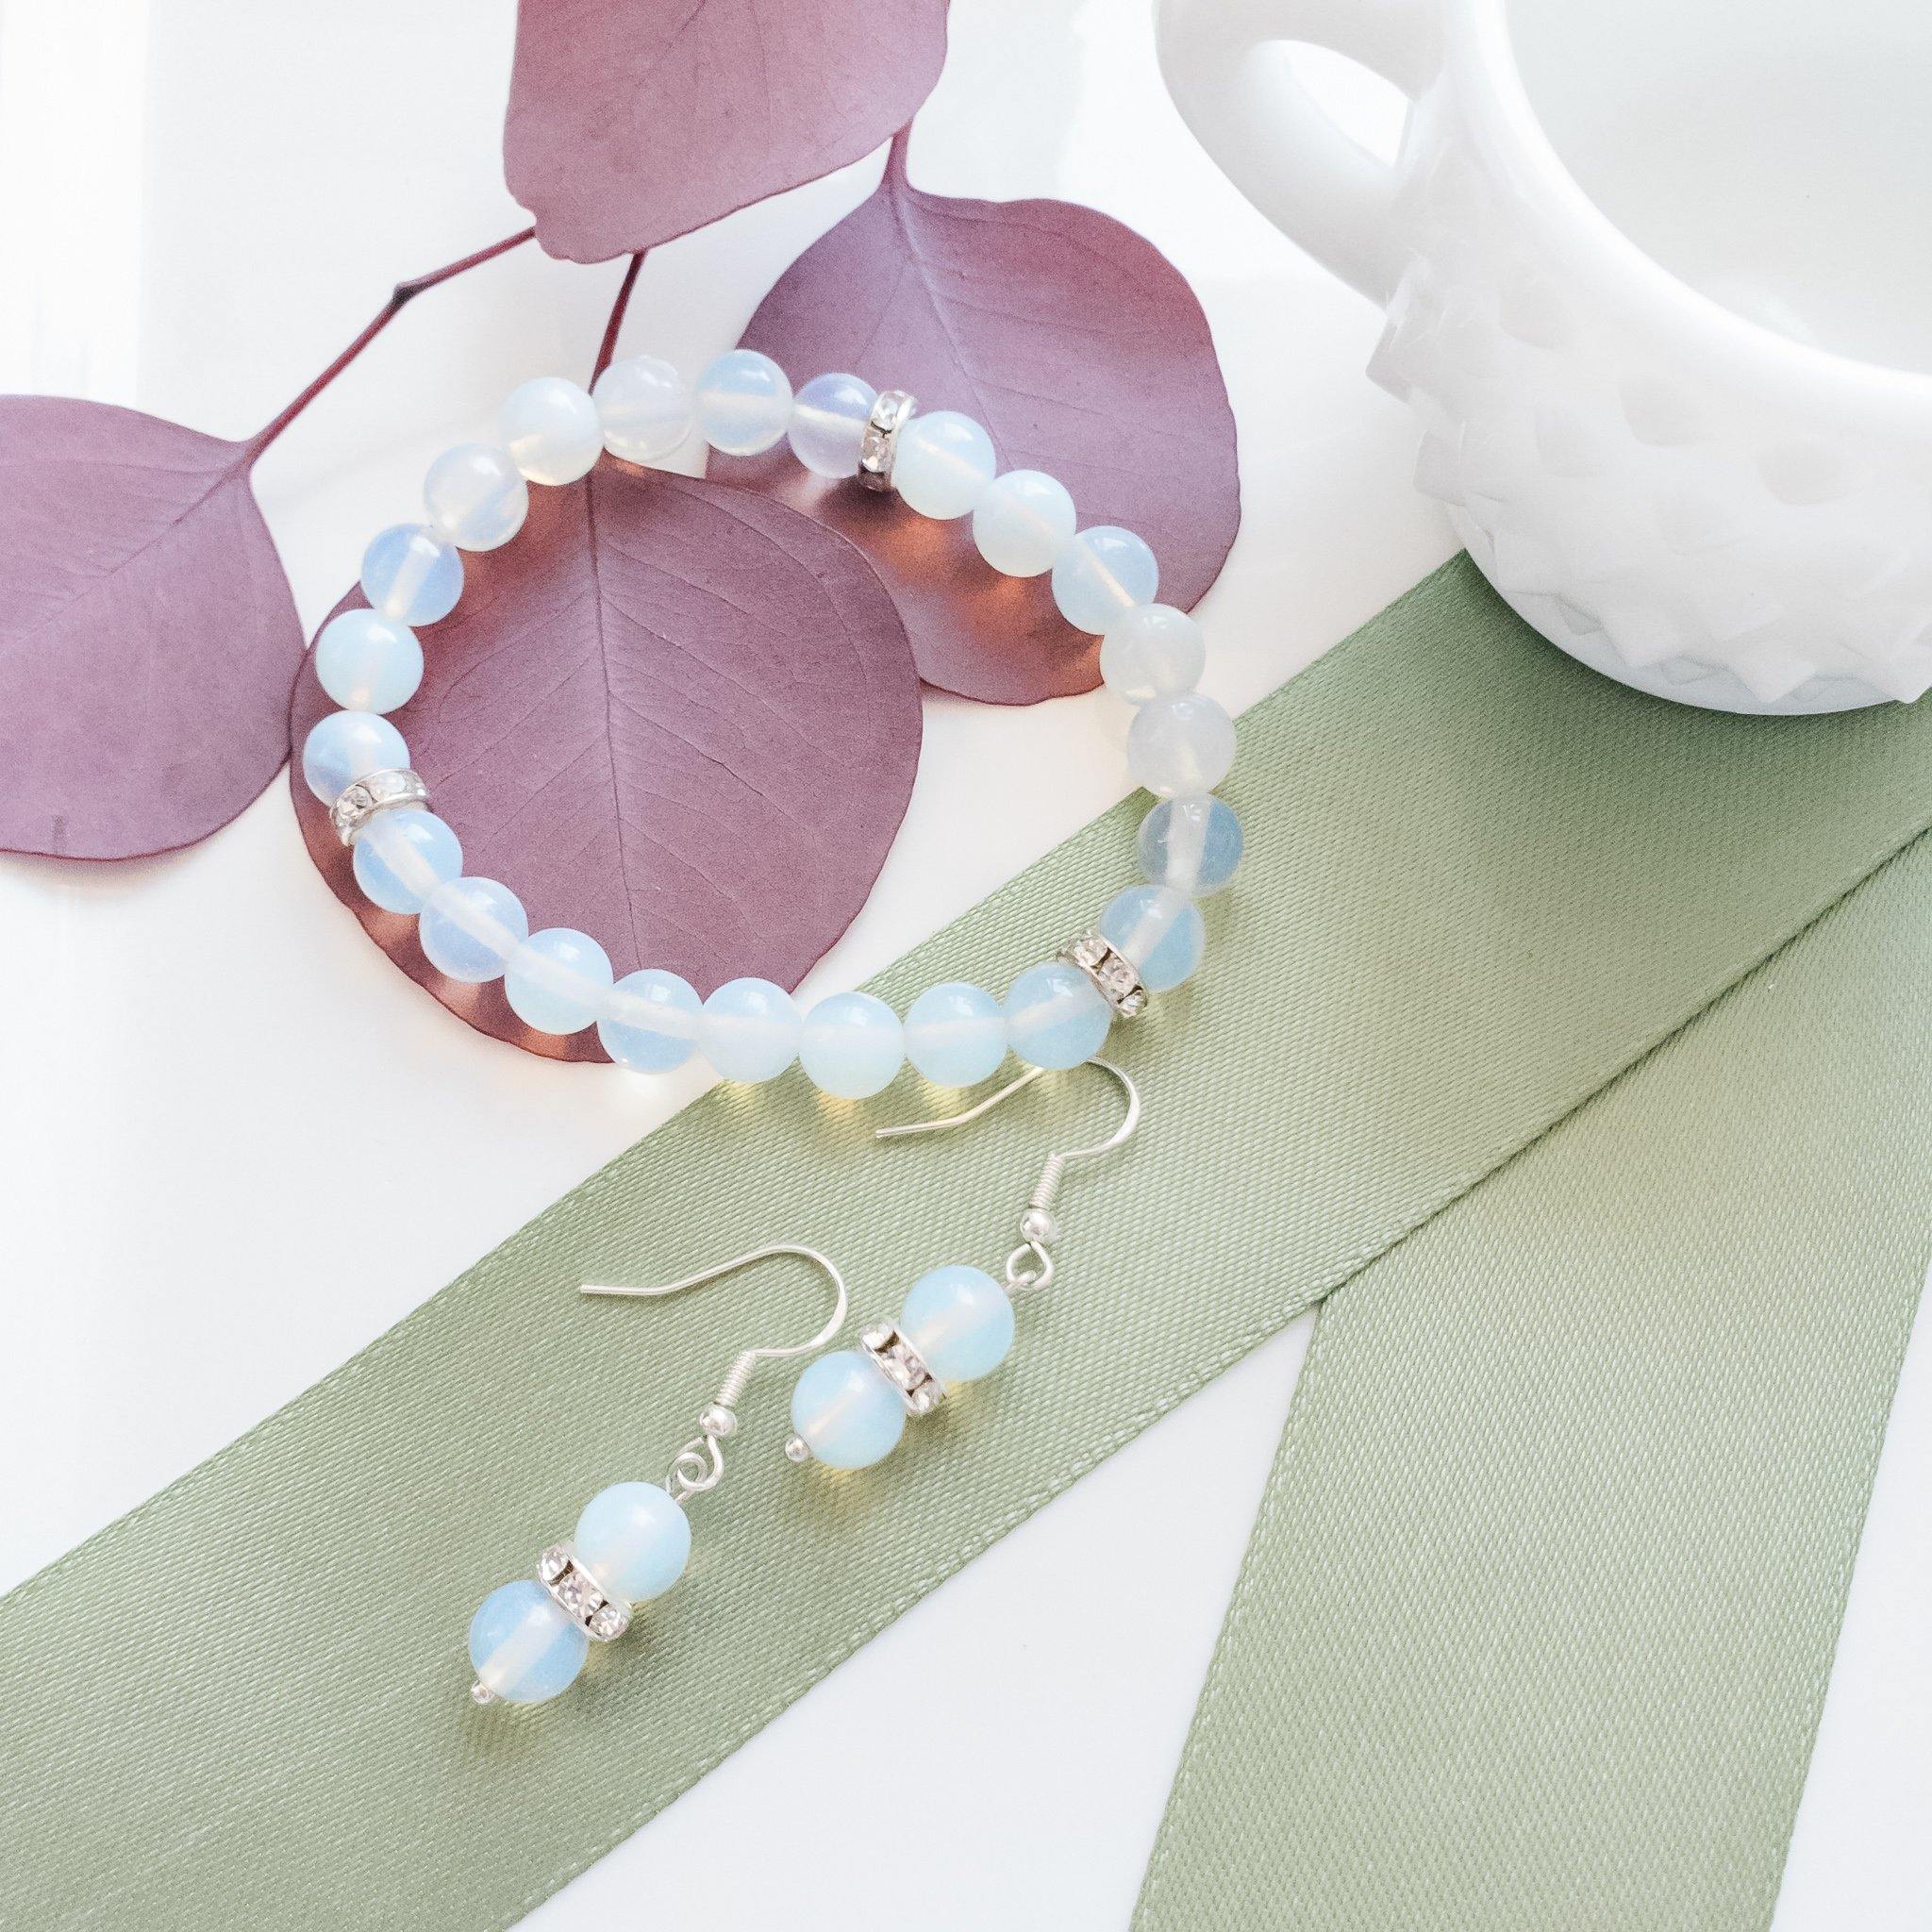 Celestial Collection - Beautiful Opalite Bracelet and Dangle Earrings with Cubic Zirconia Accents - top view - BellaChel Jeweler